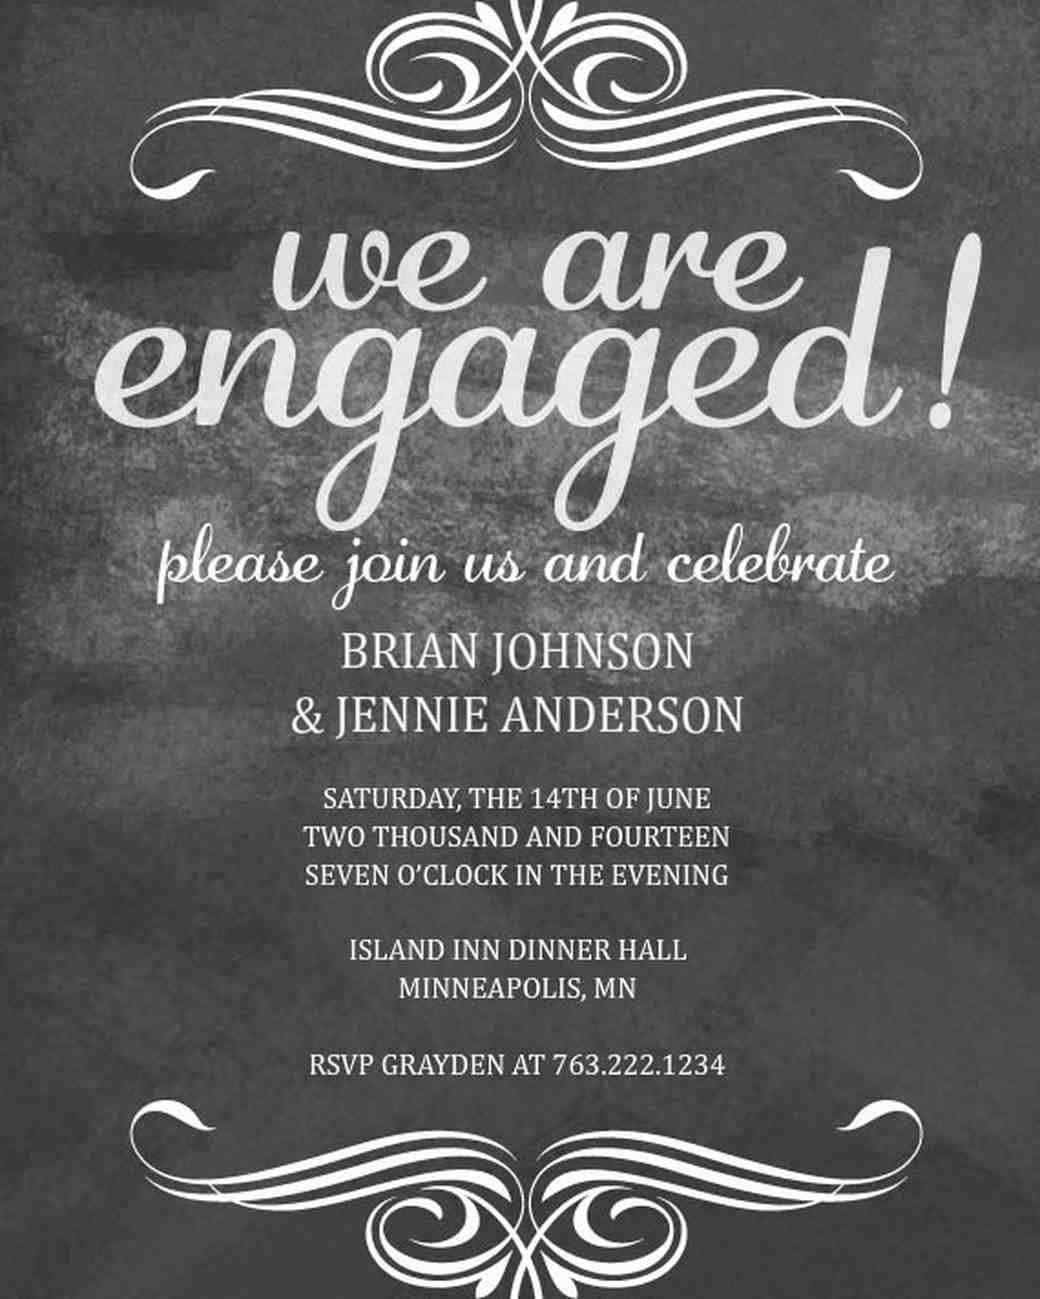 Engagement Party Invites Ideas
 35 Paperless Engagement Party Invites